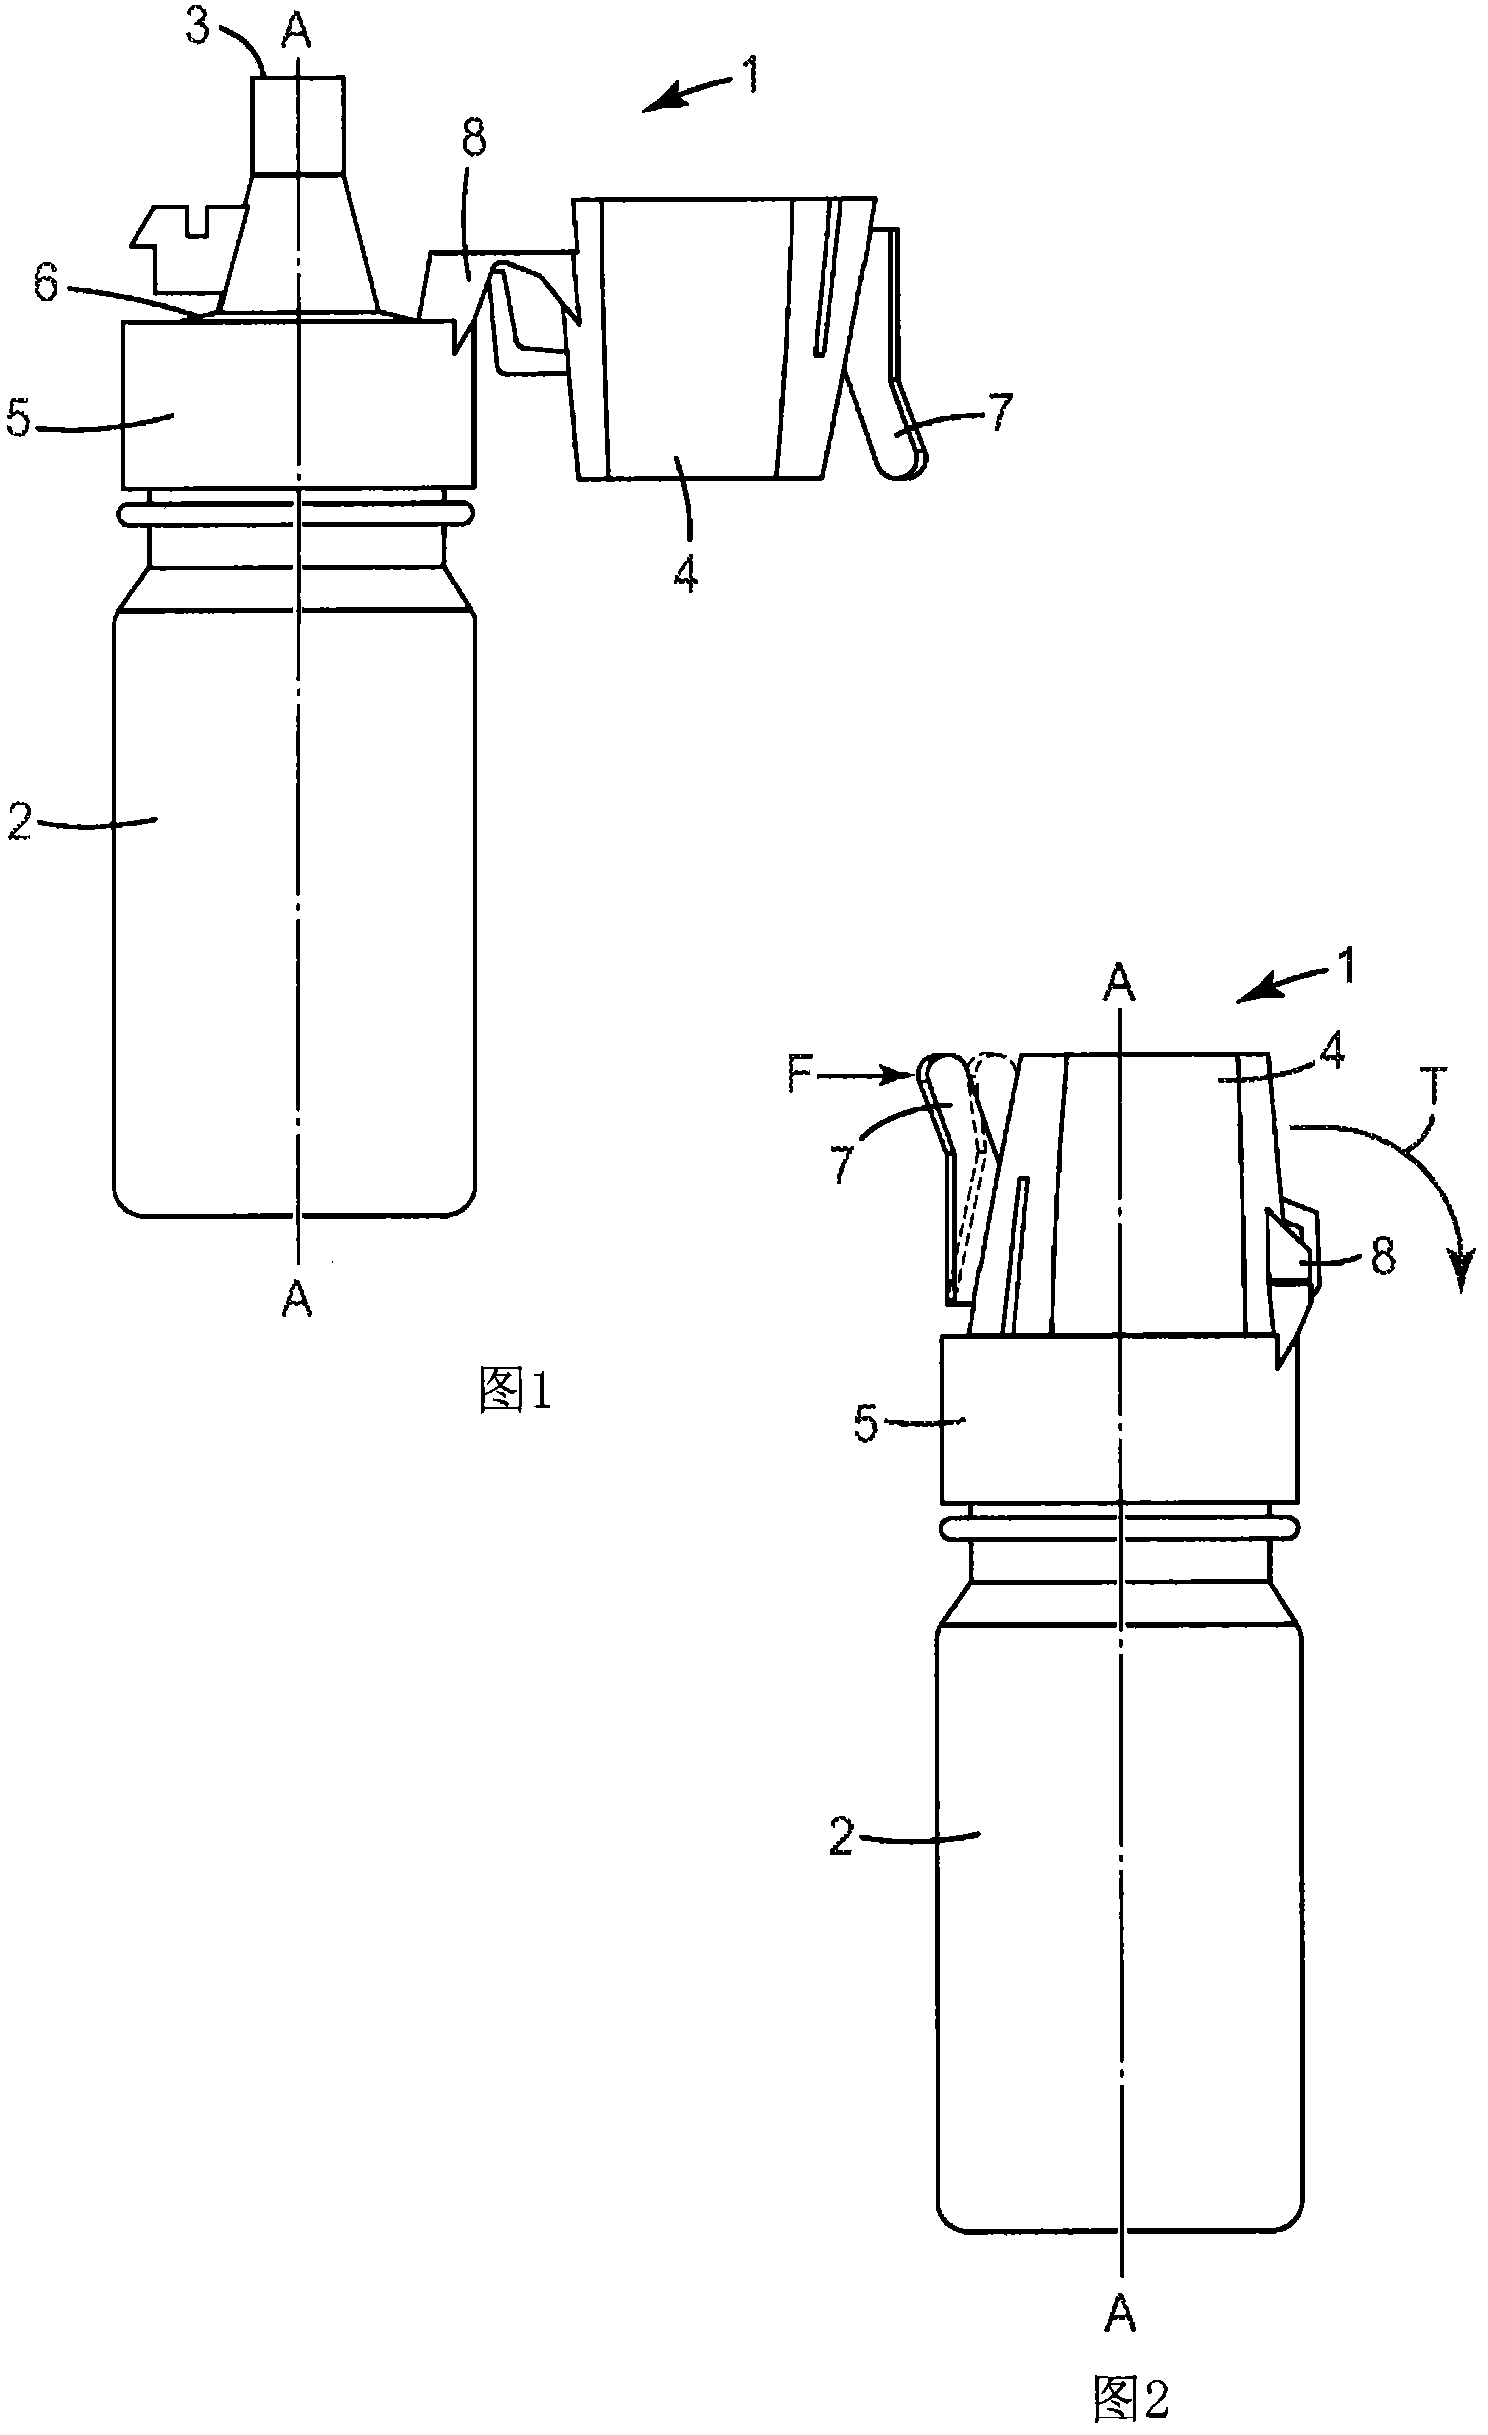 Device for dispensing a flowable material